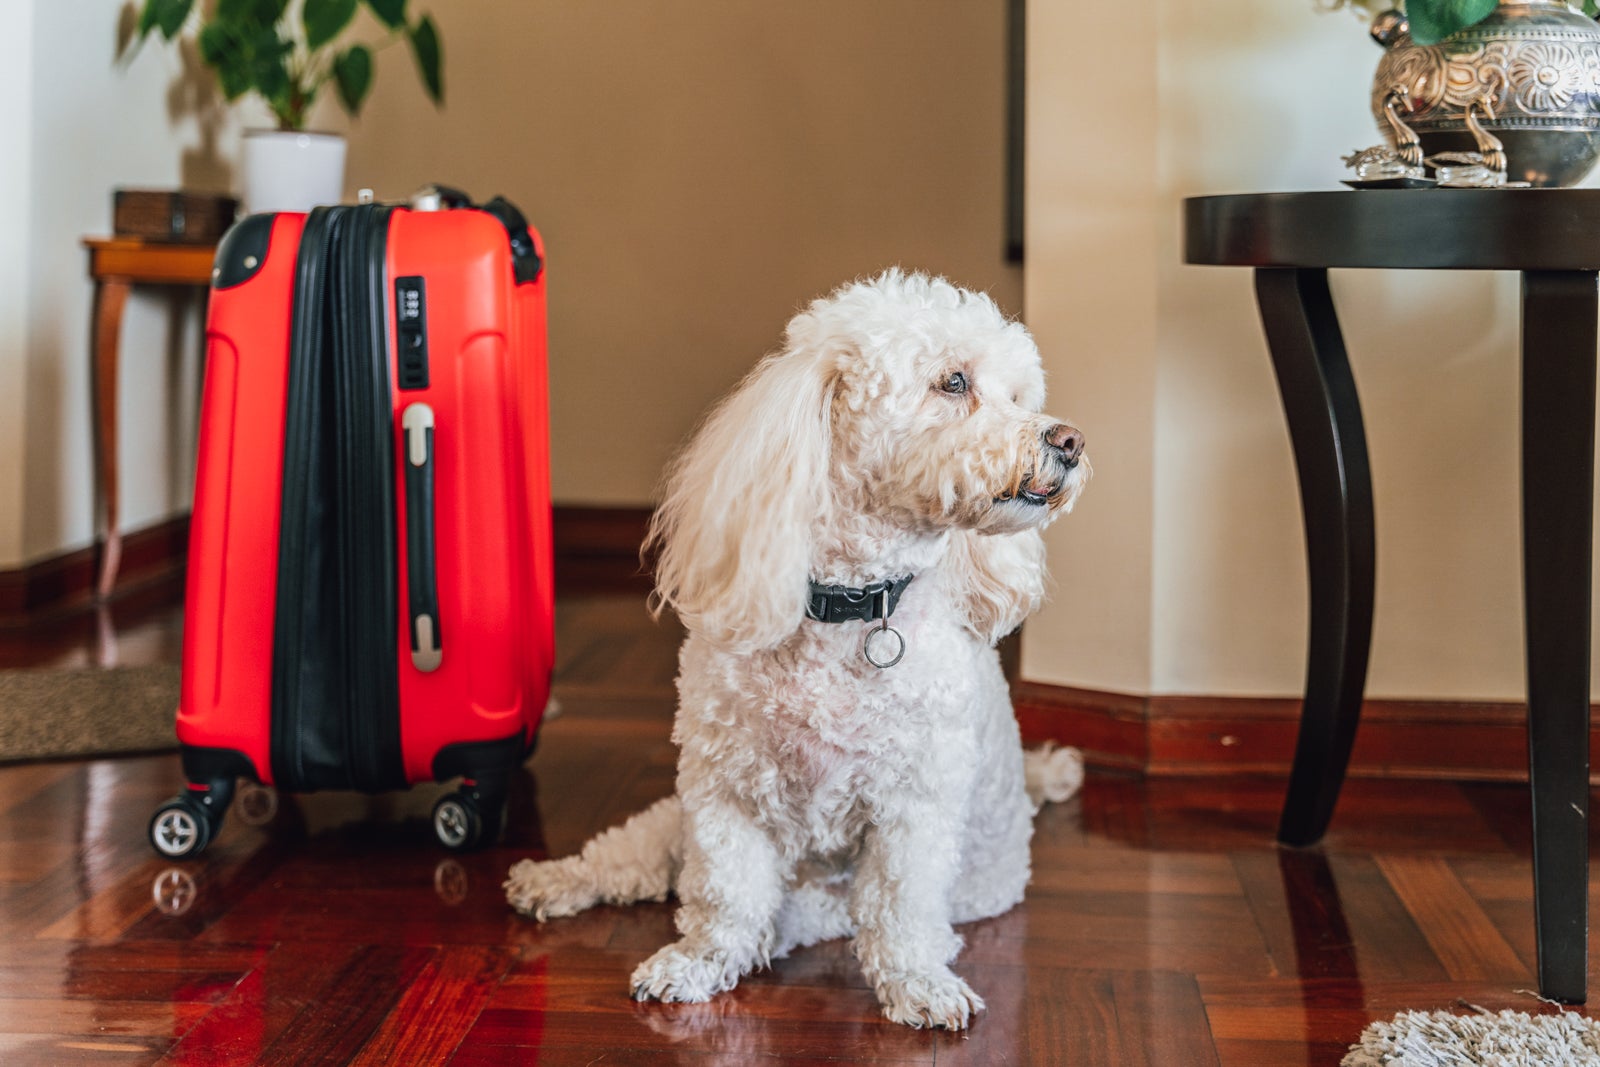 Dog with an indifferent attitude on the side of a travel bag